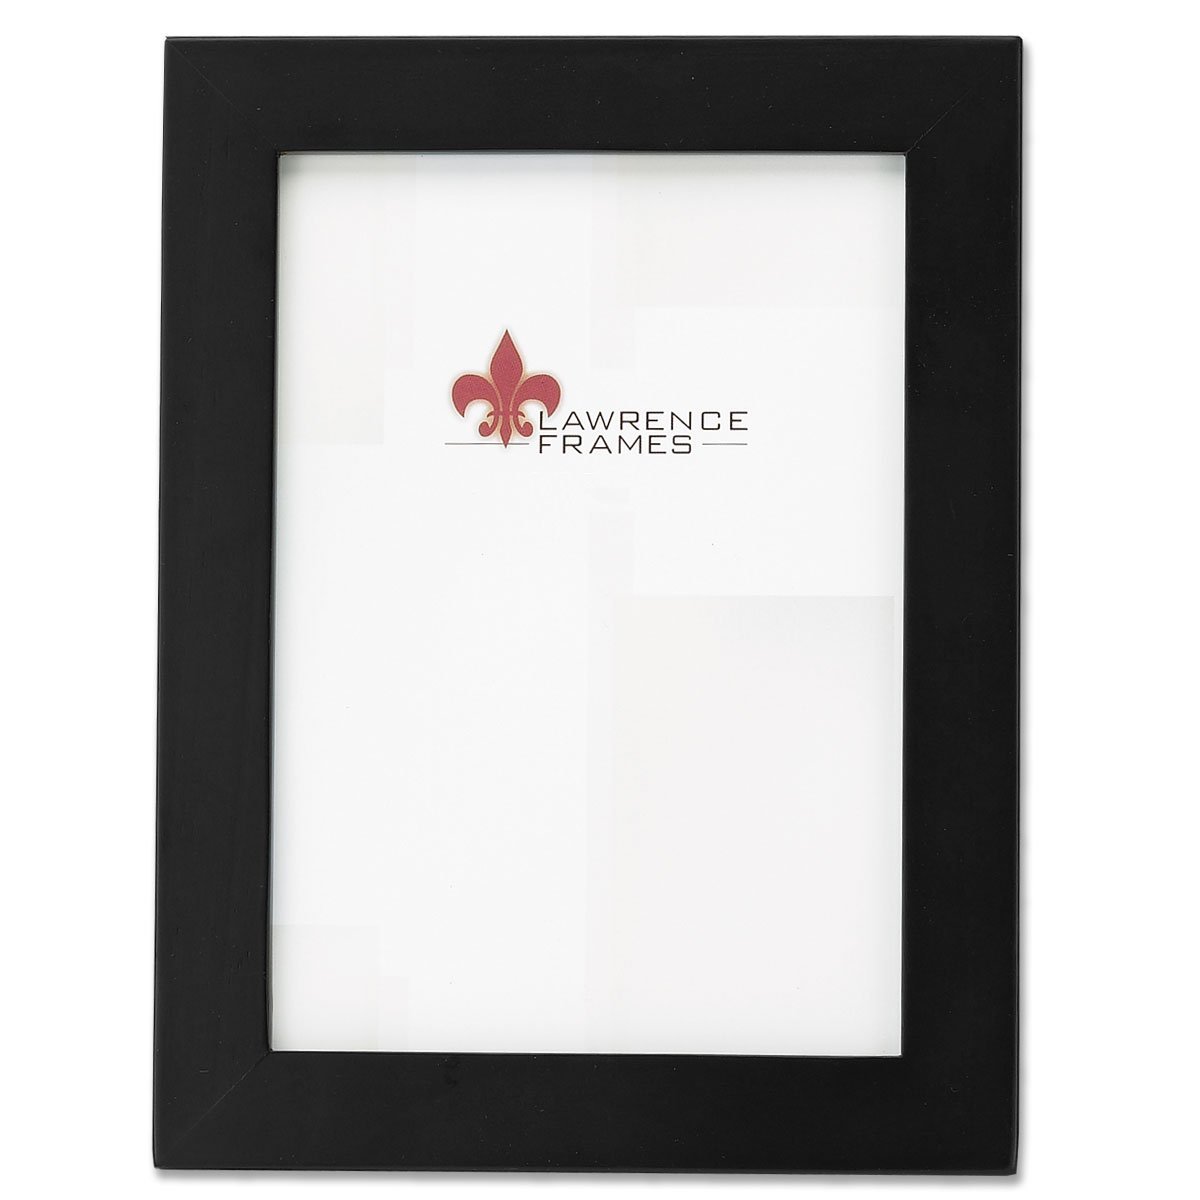 Lawrenceframes 34357 5 X 7 In. Wood Picture Frame, Black